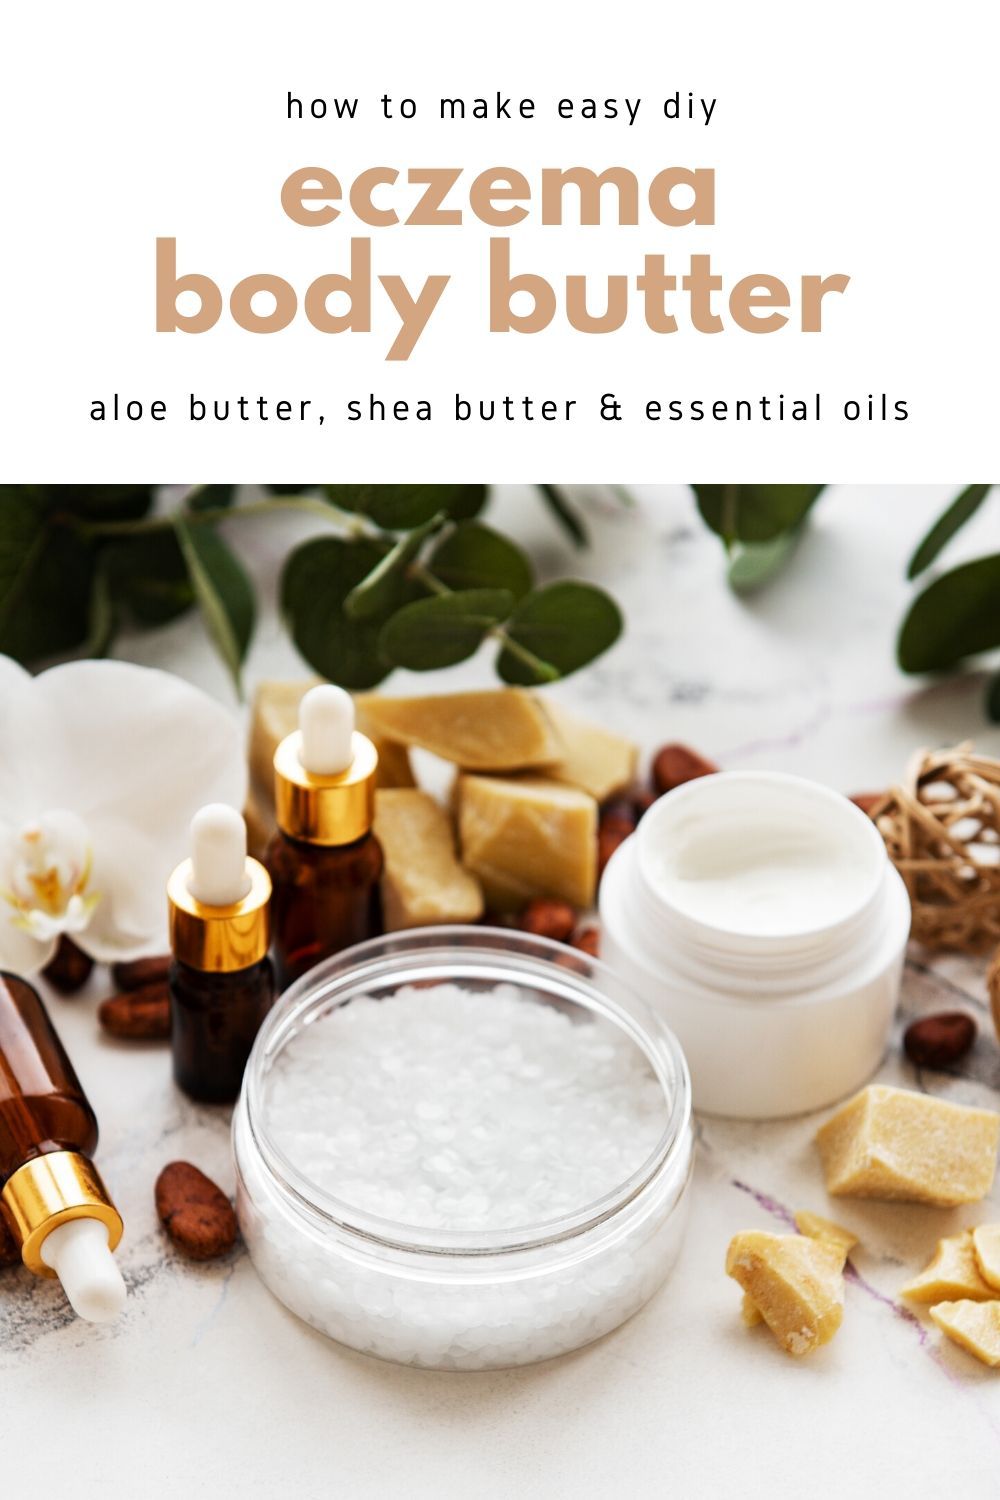 DIY Eczema Body Butter With Aloe Butter, Shea Butter, Herbal Oils, and ...